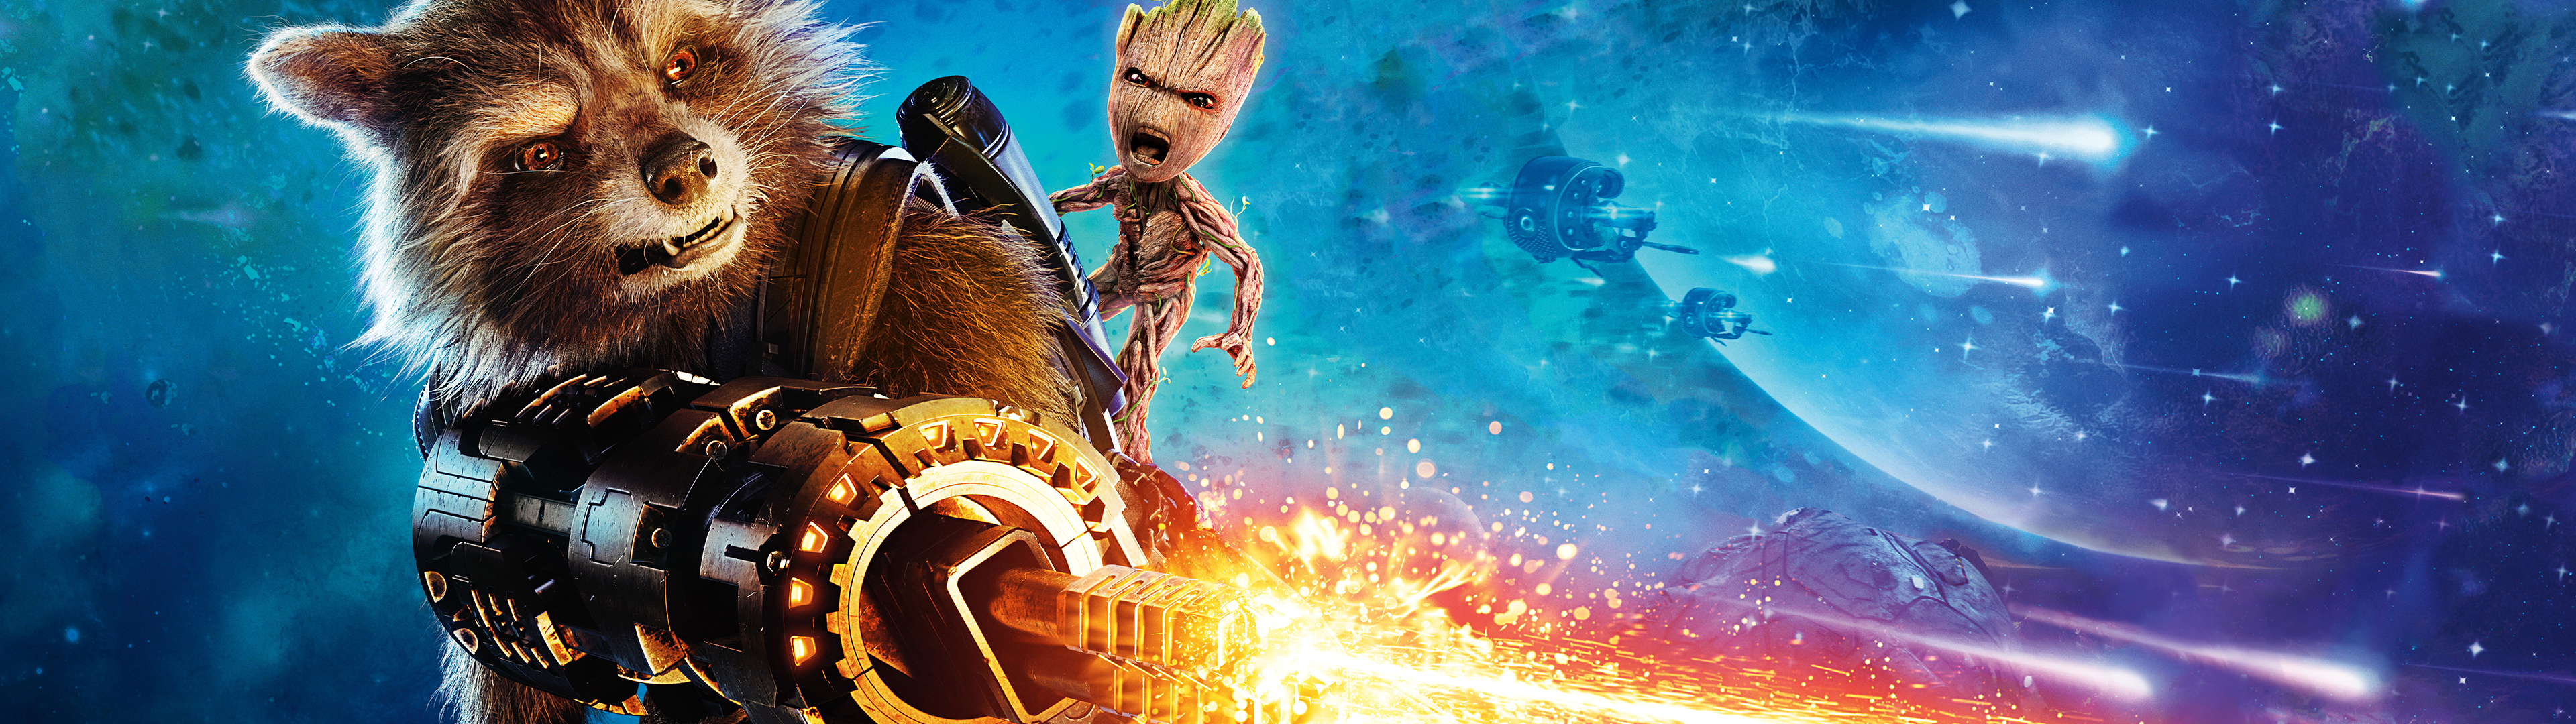 Rocket And Groot Guardians Of The Galaxy R Multiwall